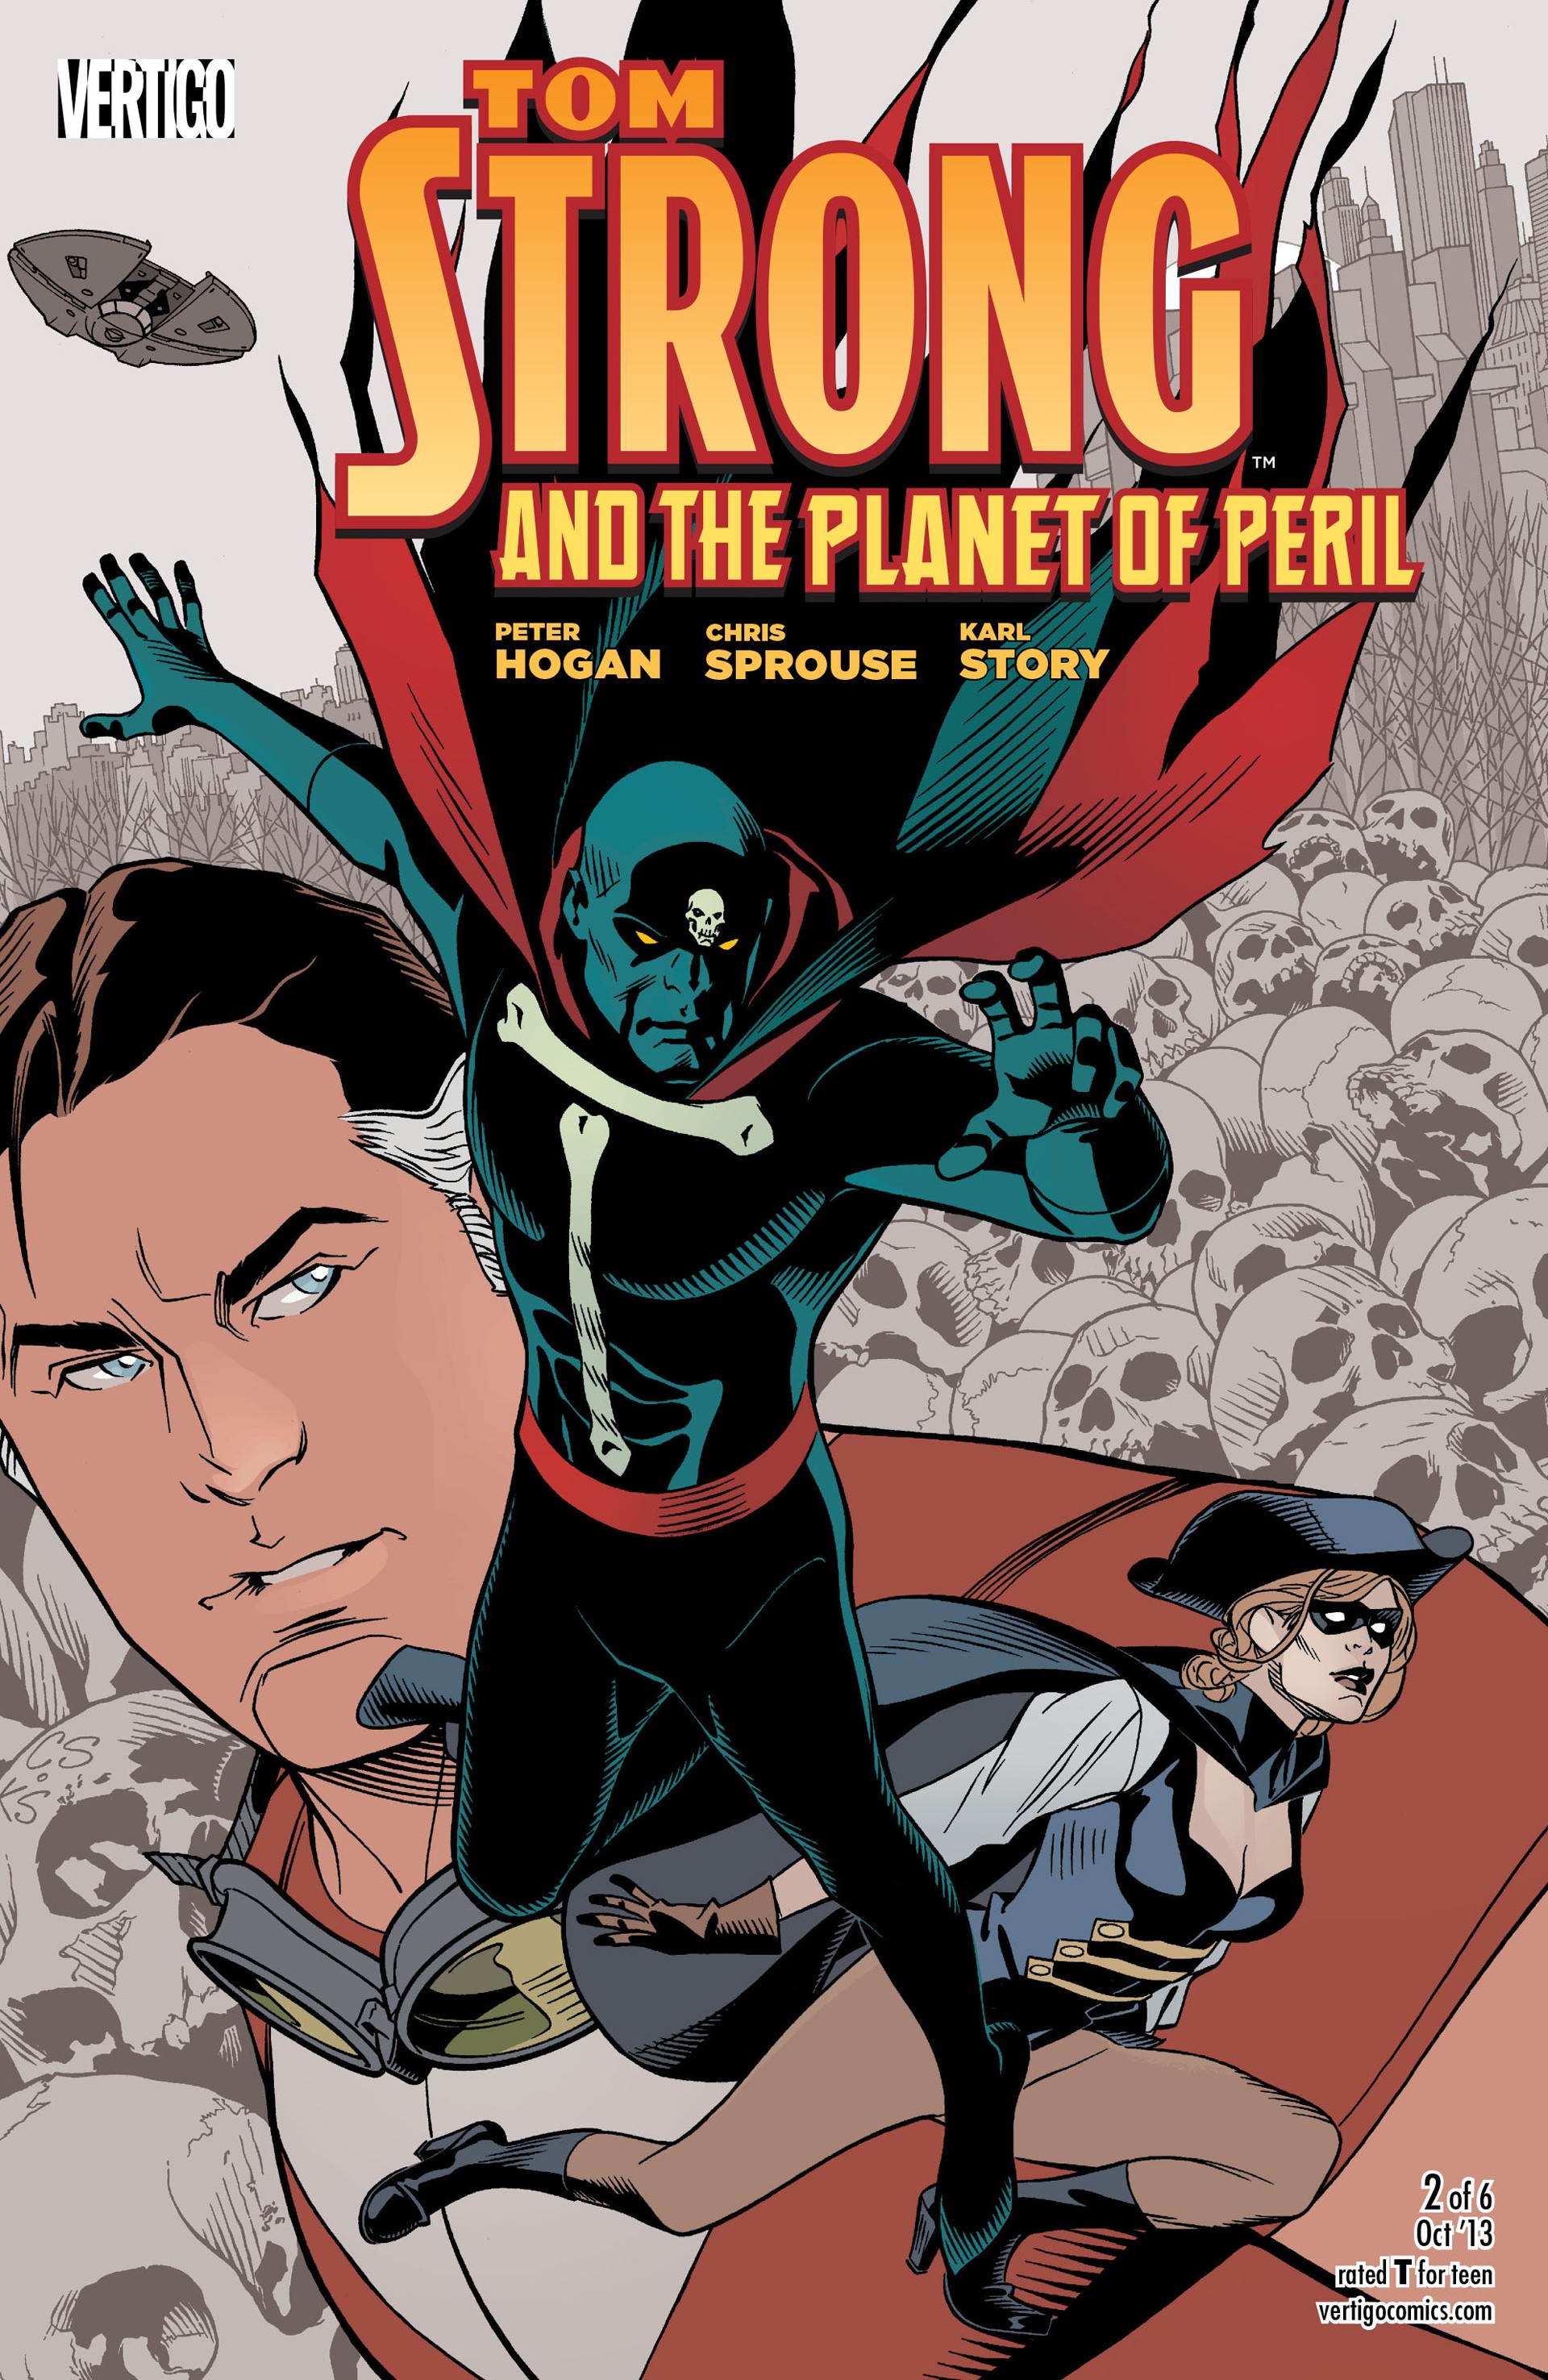 Tom Strong and the Planet of Peril Vol. 1 #2